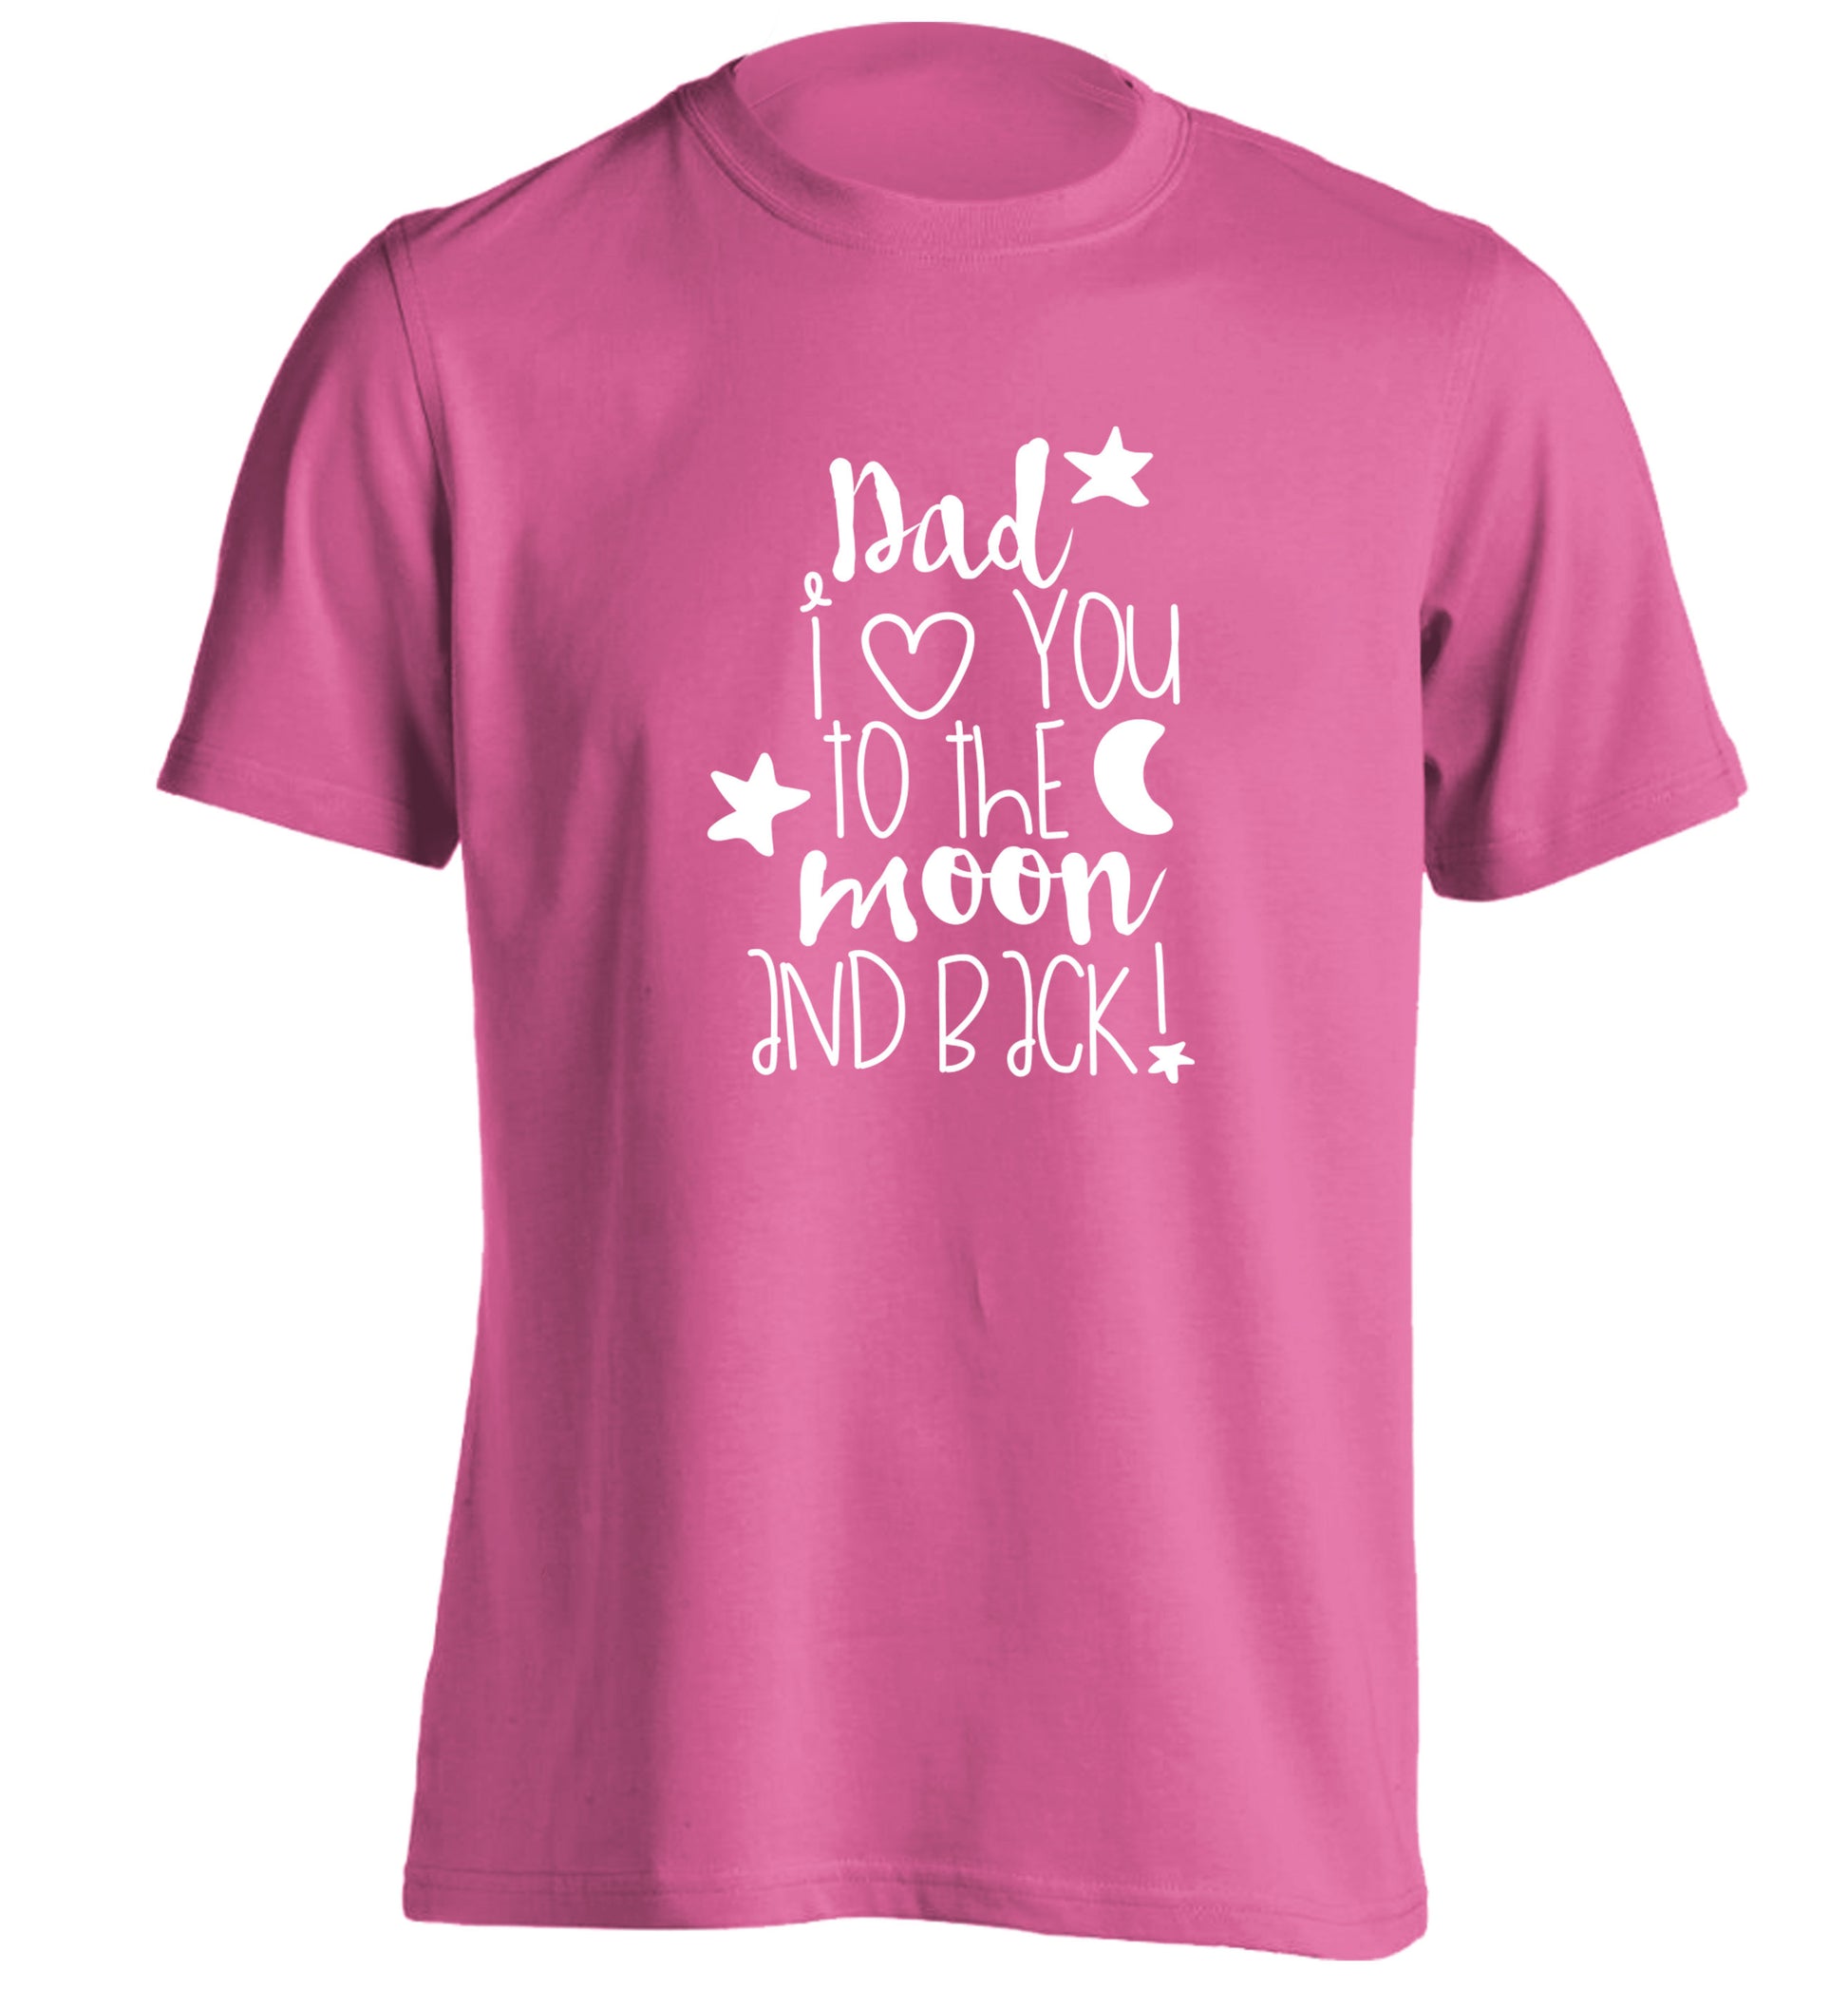 Dad I love you to the moon and back adults unisex pink Tshirt 2XL